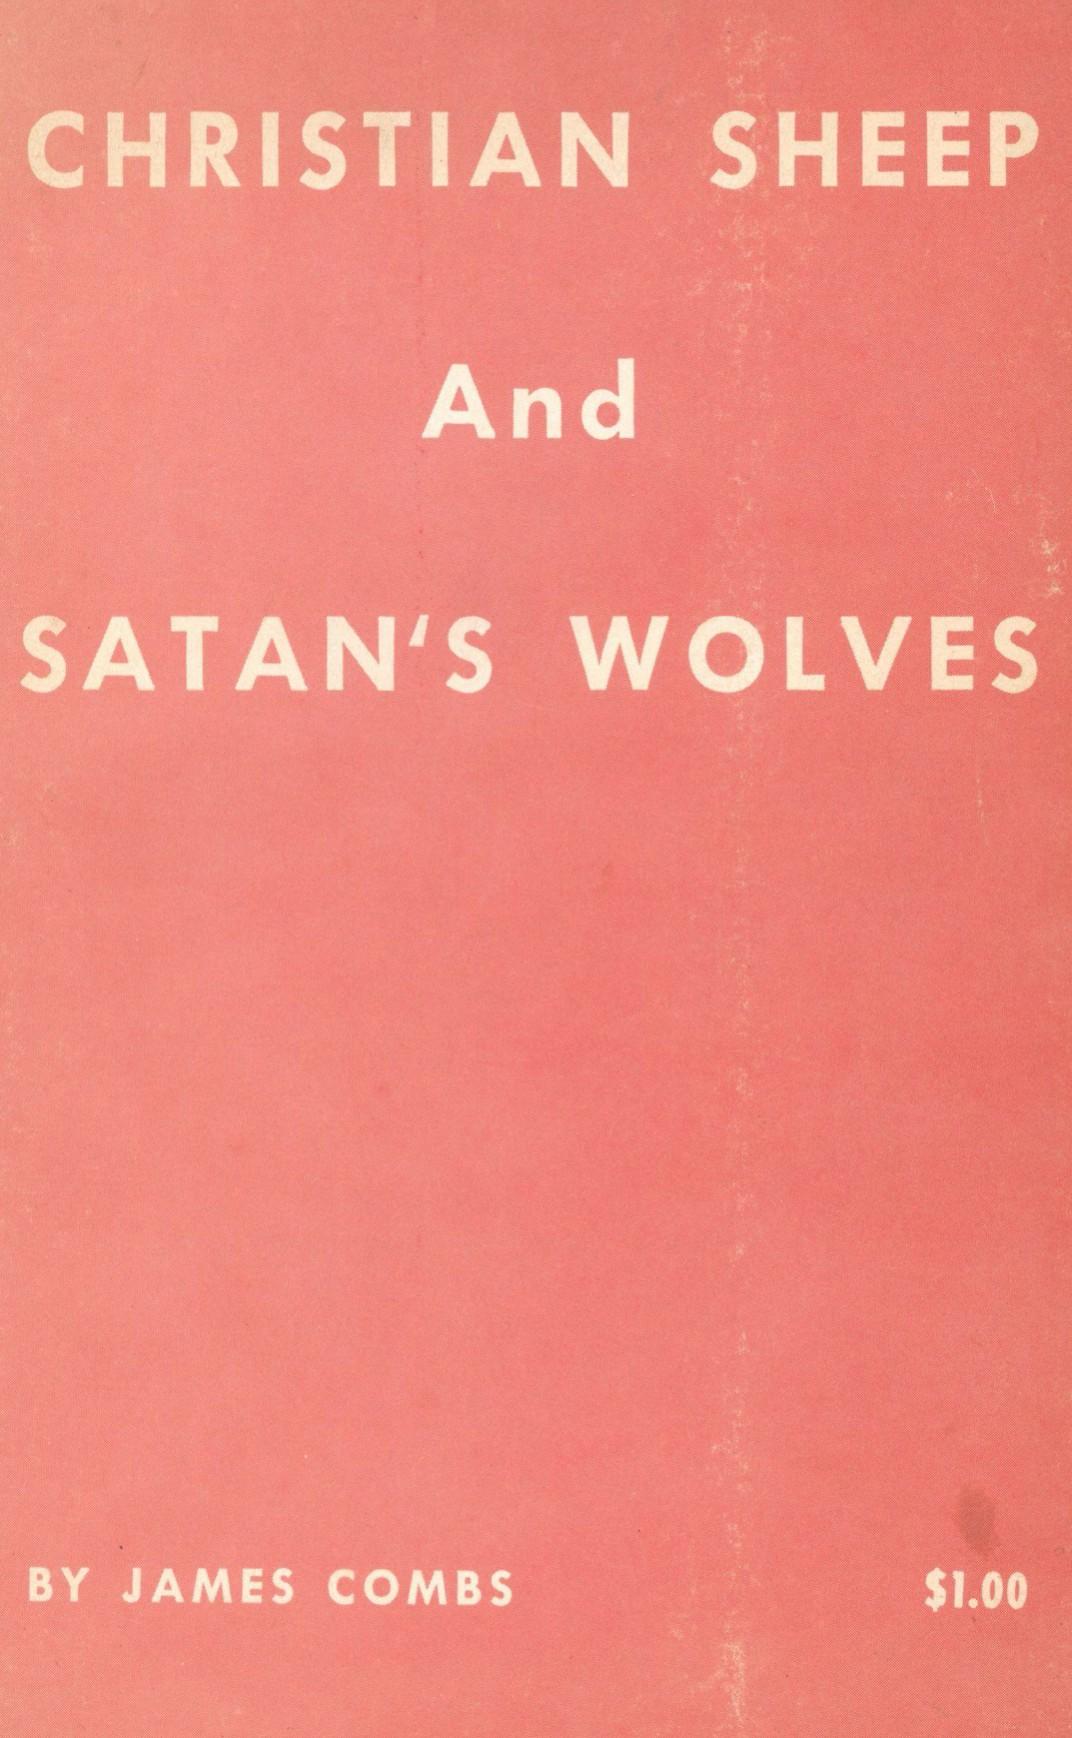 Christian Sheep and Satan's Wolves (1971) by James Combs